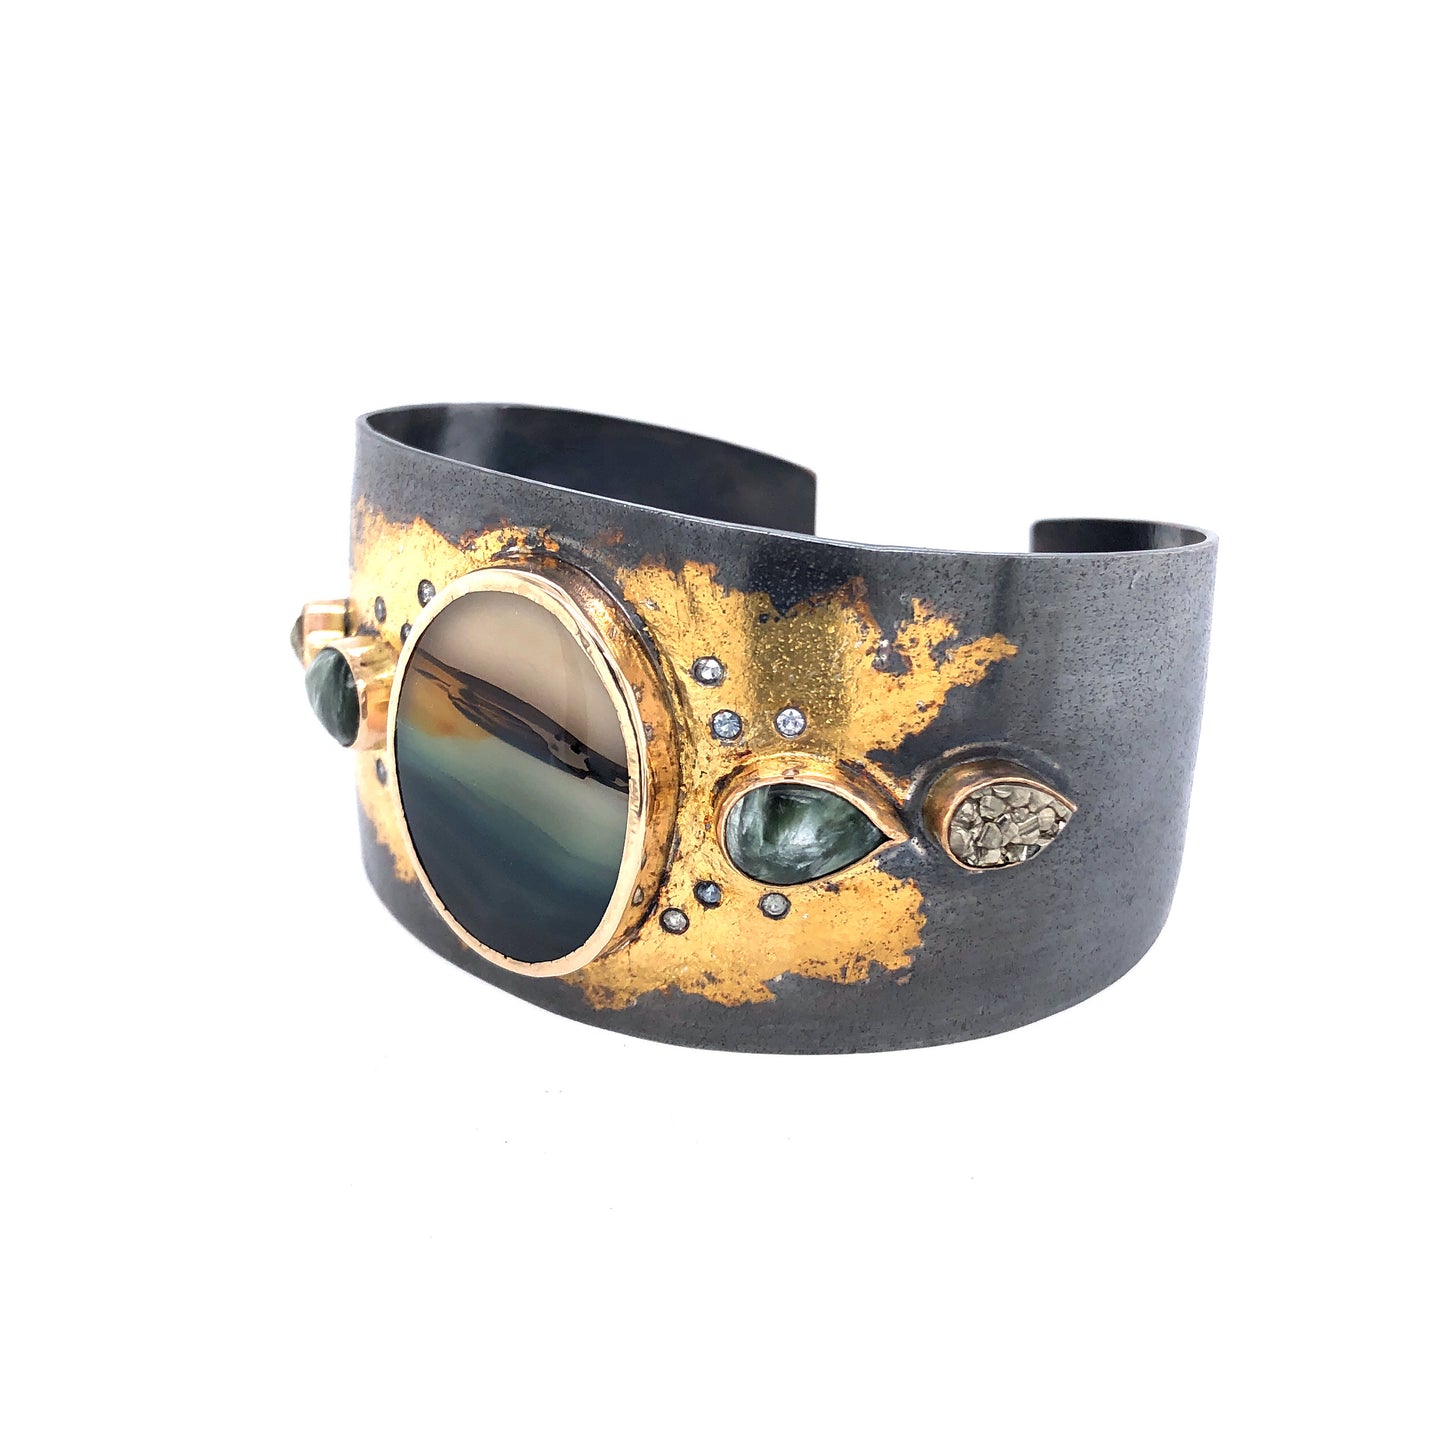 Landscape Agate and Montana Sapphire Cuff Bracelet, Handmade  in 14k Gold and Sterling Silver